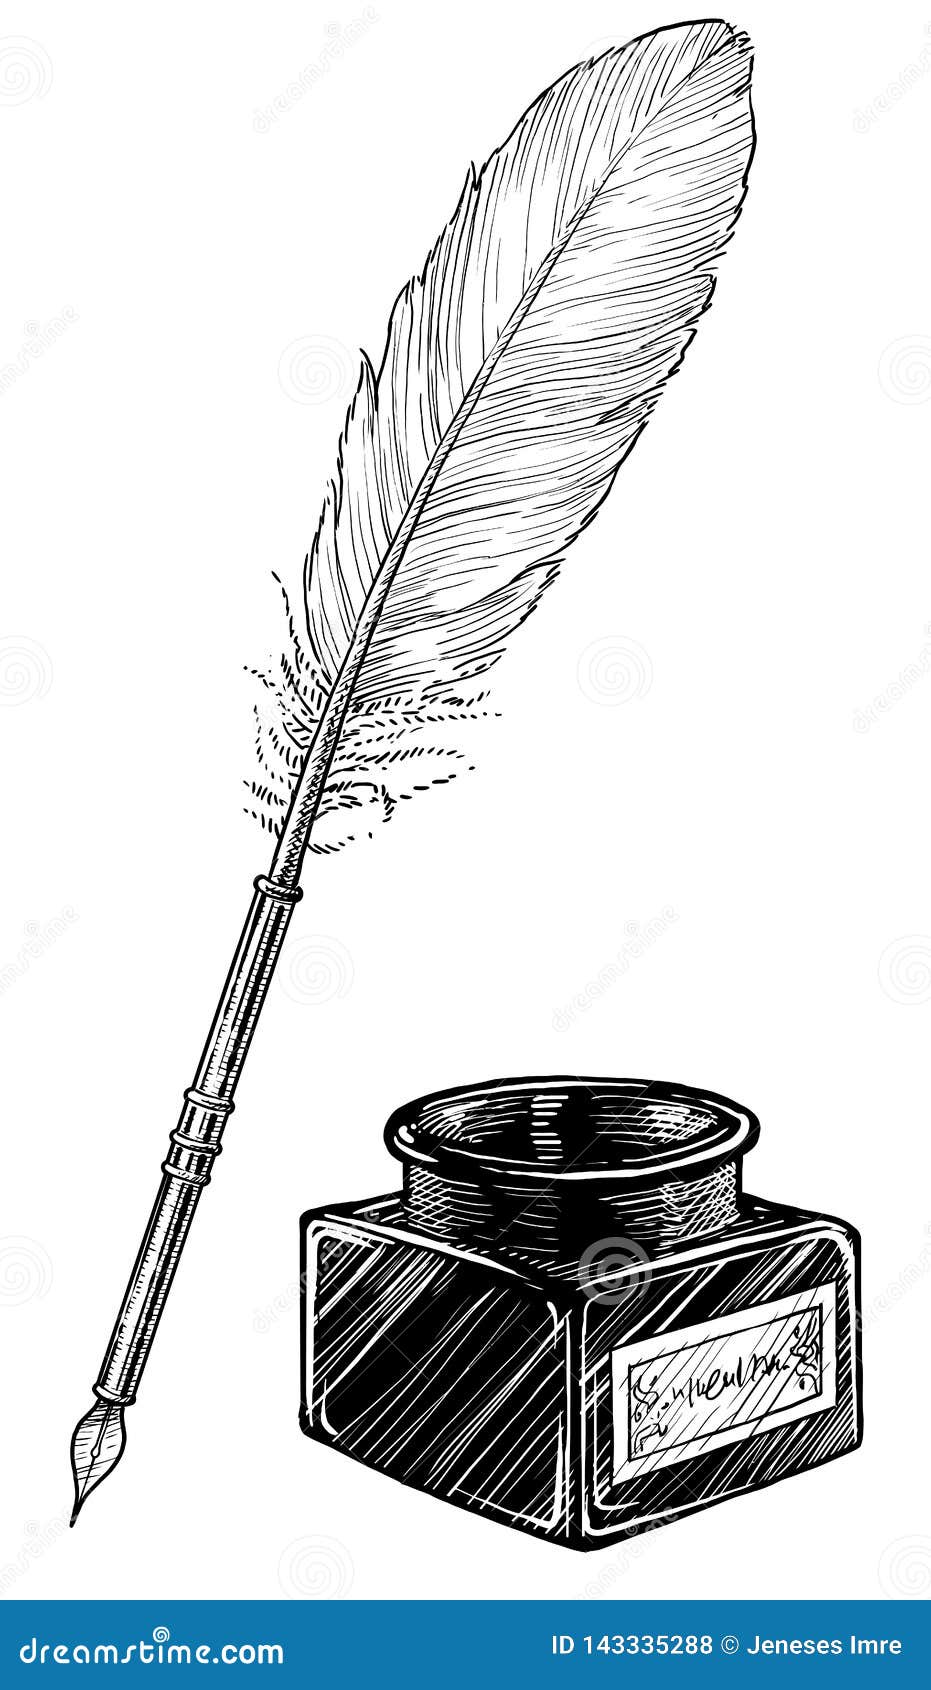 feather pen ink bottle illustration drawing engraving line art vector what made pencil paper then was digitalized 143335288